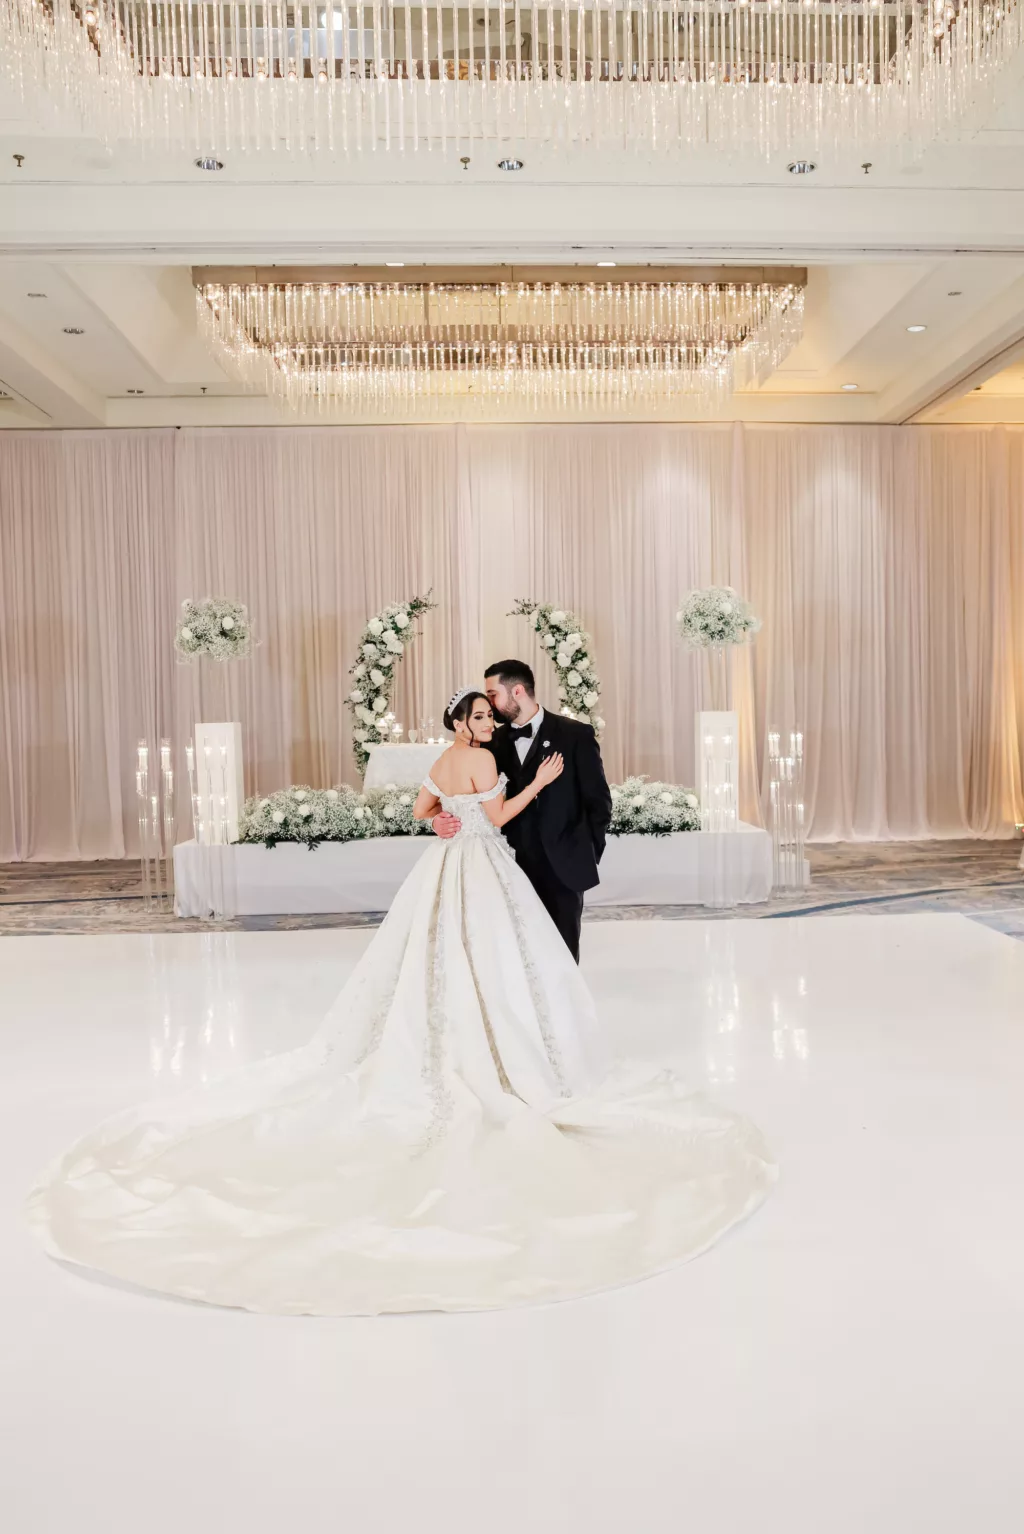 Luxurious Ivory, White, and Gold Wedding Reception Ideas | Tampa Bay Hotel Venue Hilton Tampa Downtown | Planner Special Moments Event Planning | Photographer Lifelong Photography Studio